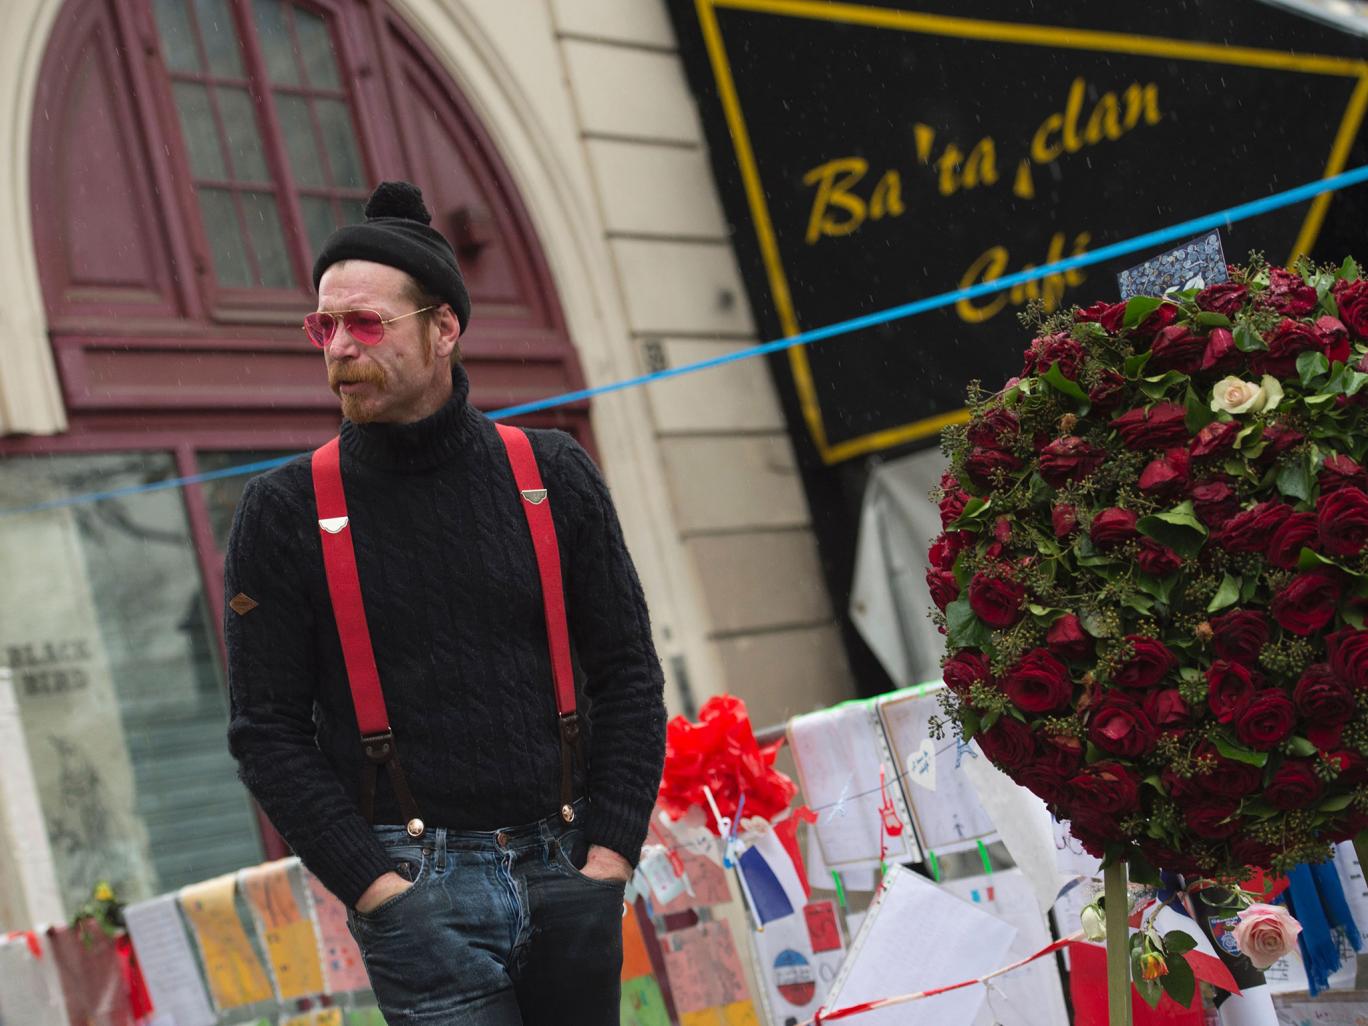 Jesse Hughes suggested Muslim staff at the Bataclan were involved in the attack on 13 November 2015